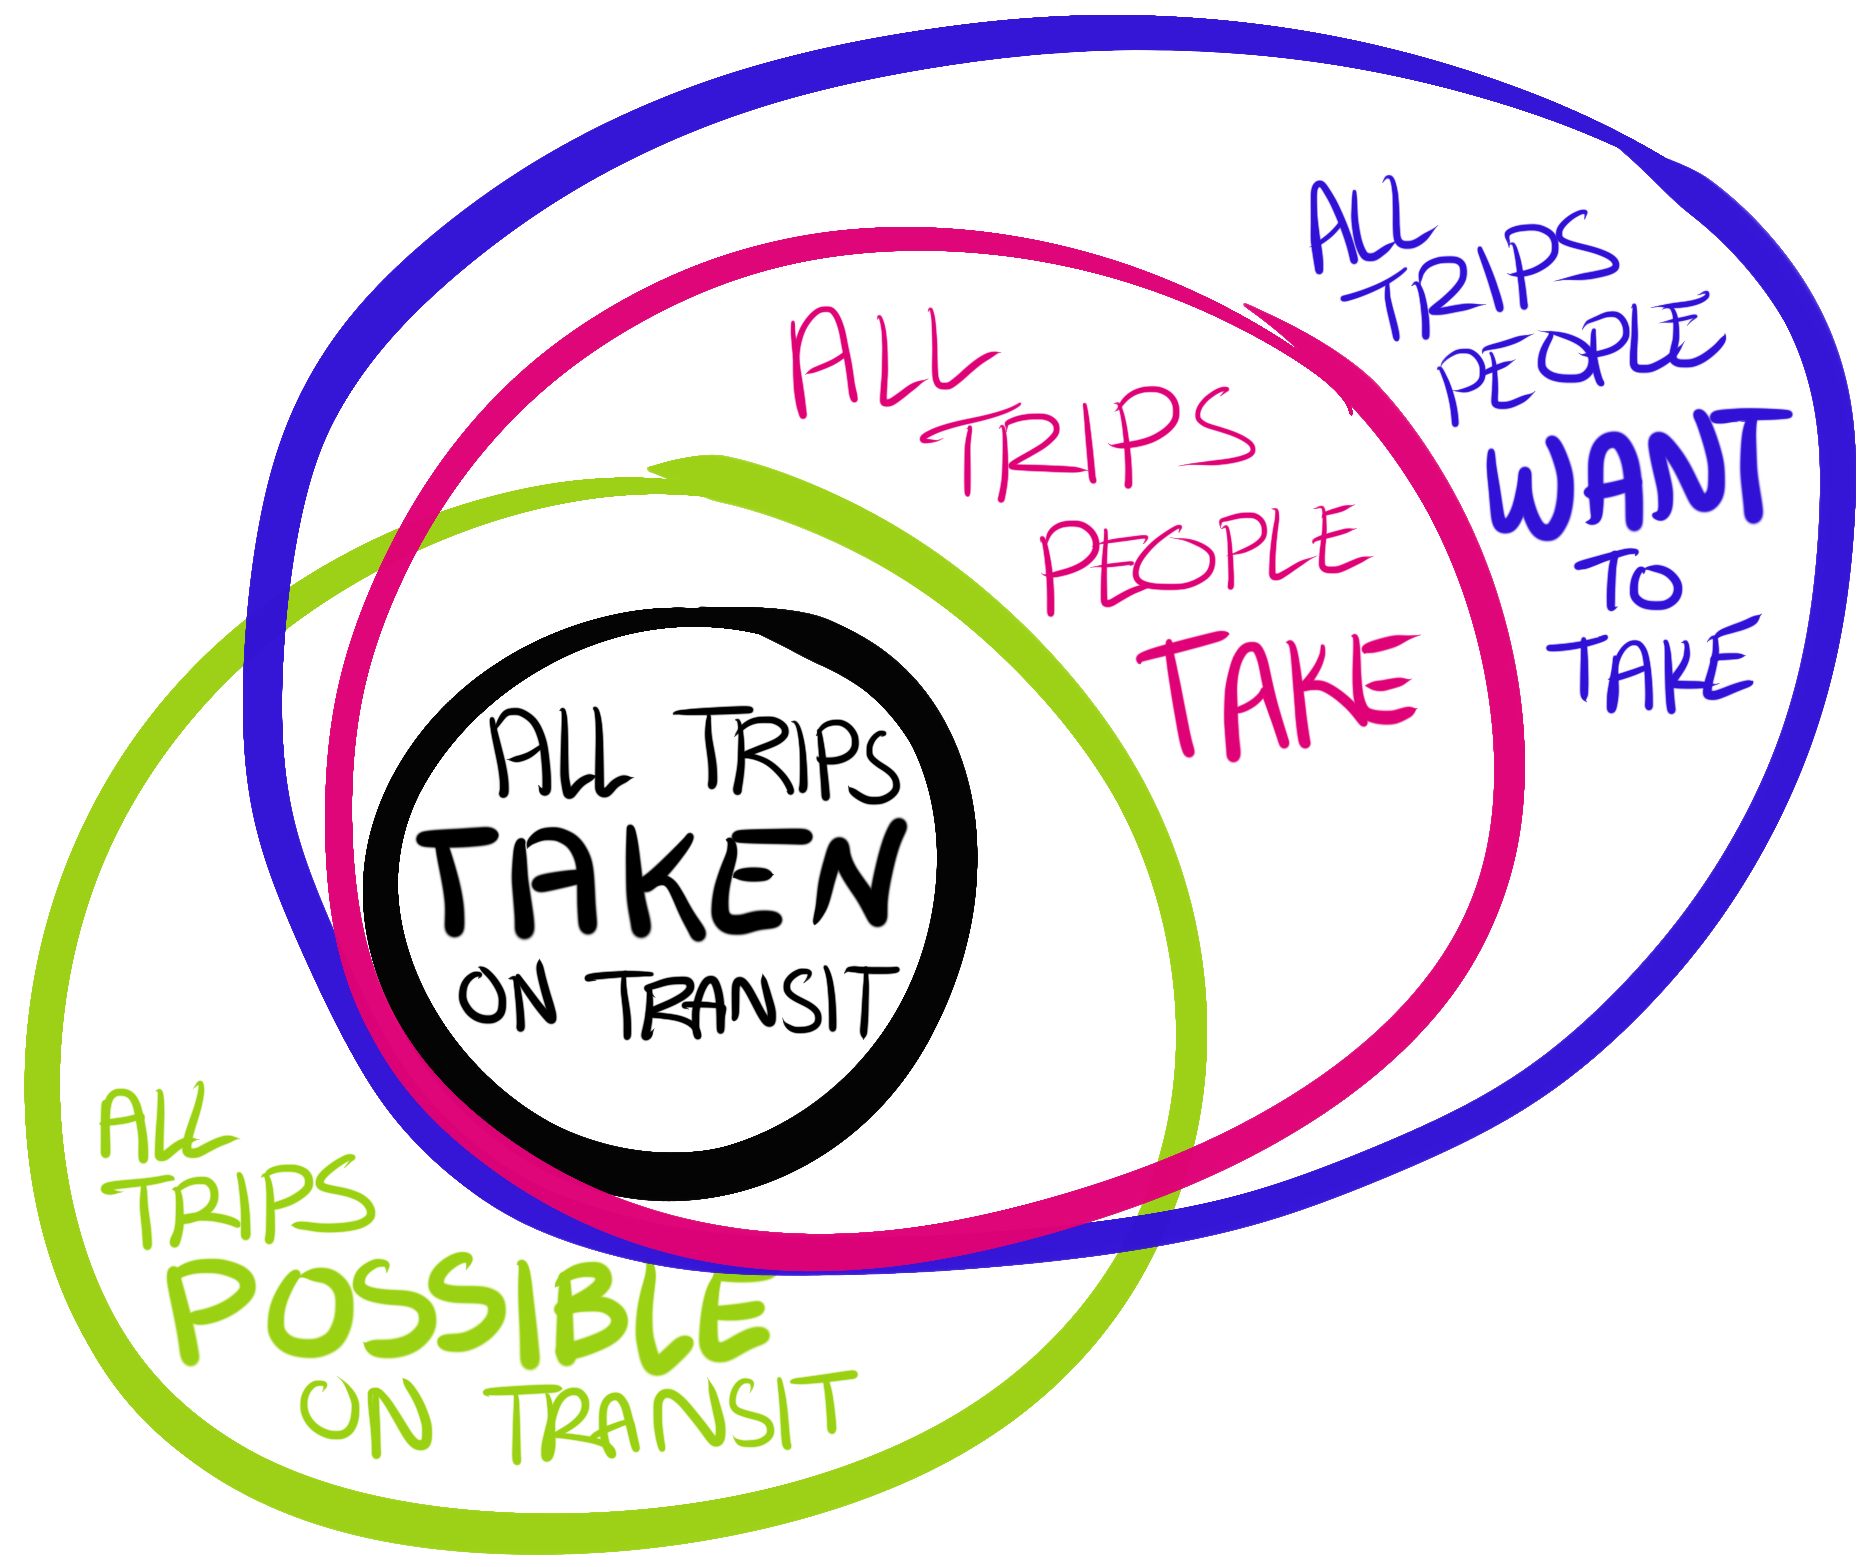 Venn Diagram. Trips People Want to Take partially overlaps with Trips People Do Take, both of which partially overlap with Trips Possible on Transit. In the center is a small circle representing the subset of all three universes: Trips Taken on Transit.